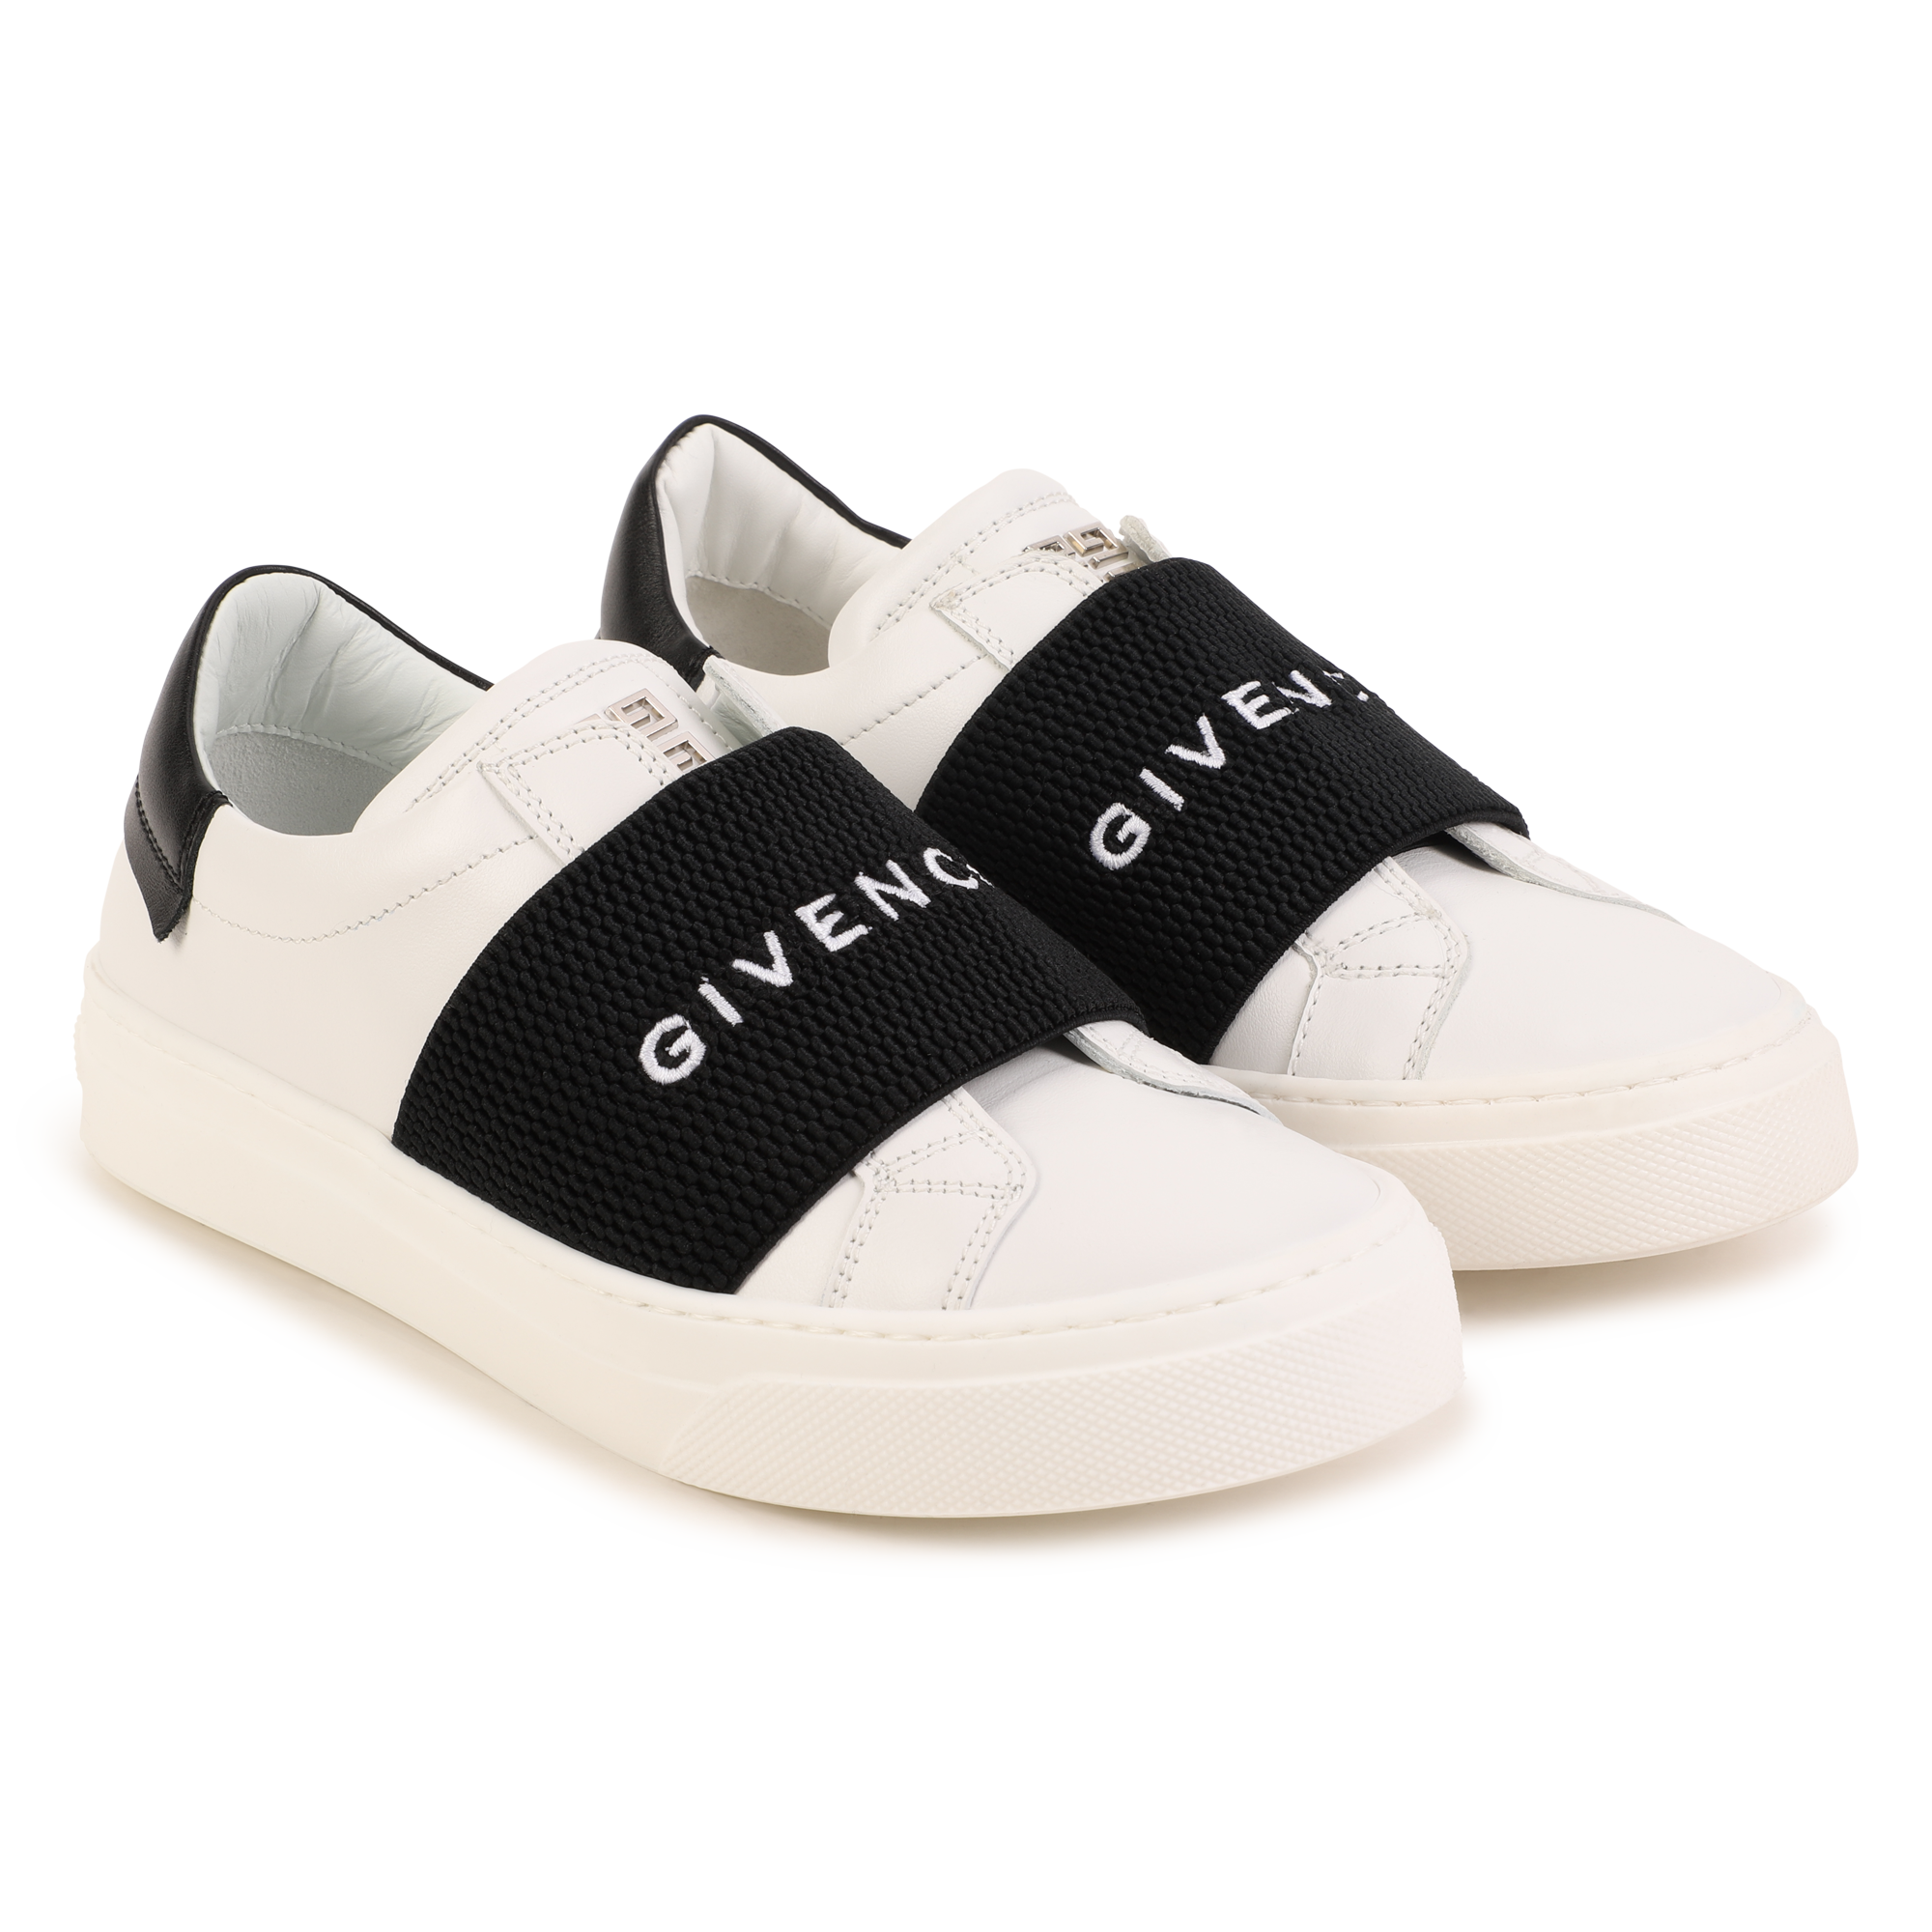 Givenchy City Sport Leather Sneakers - White | Editorialist